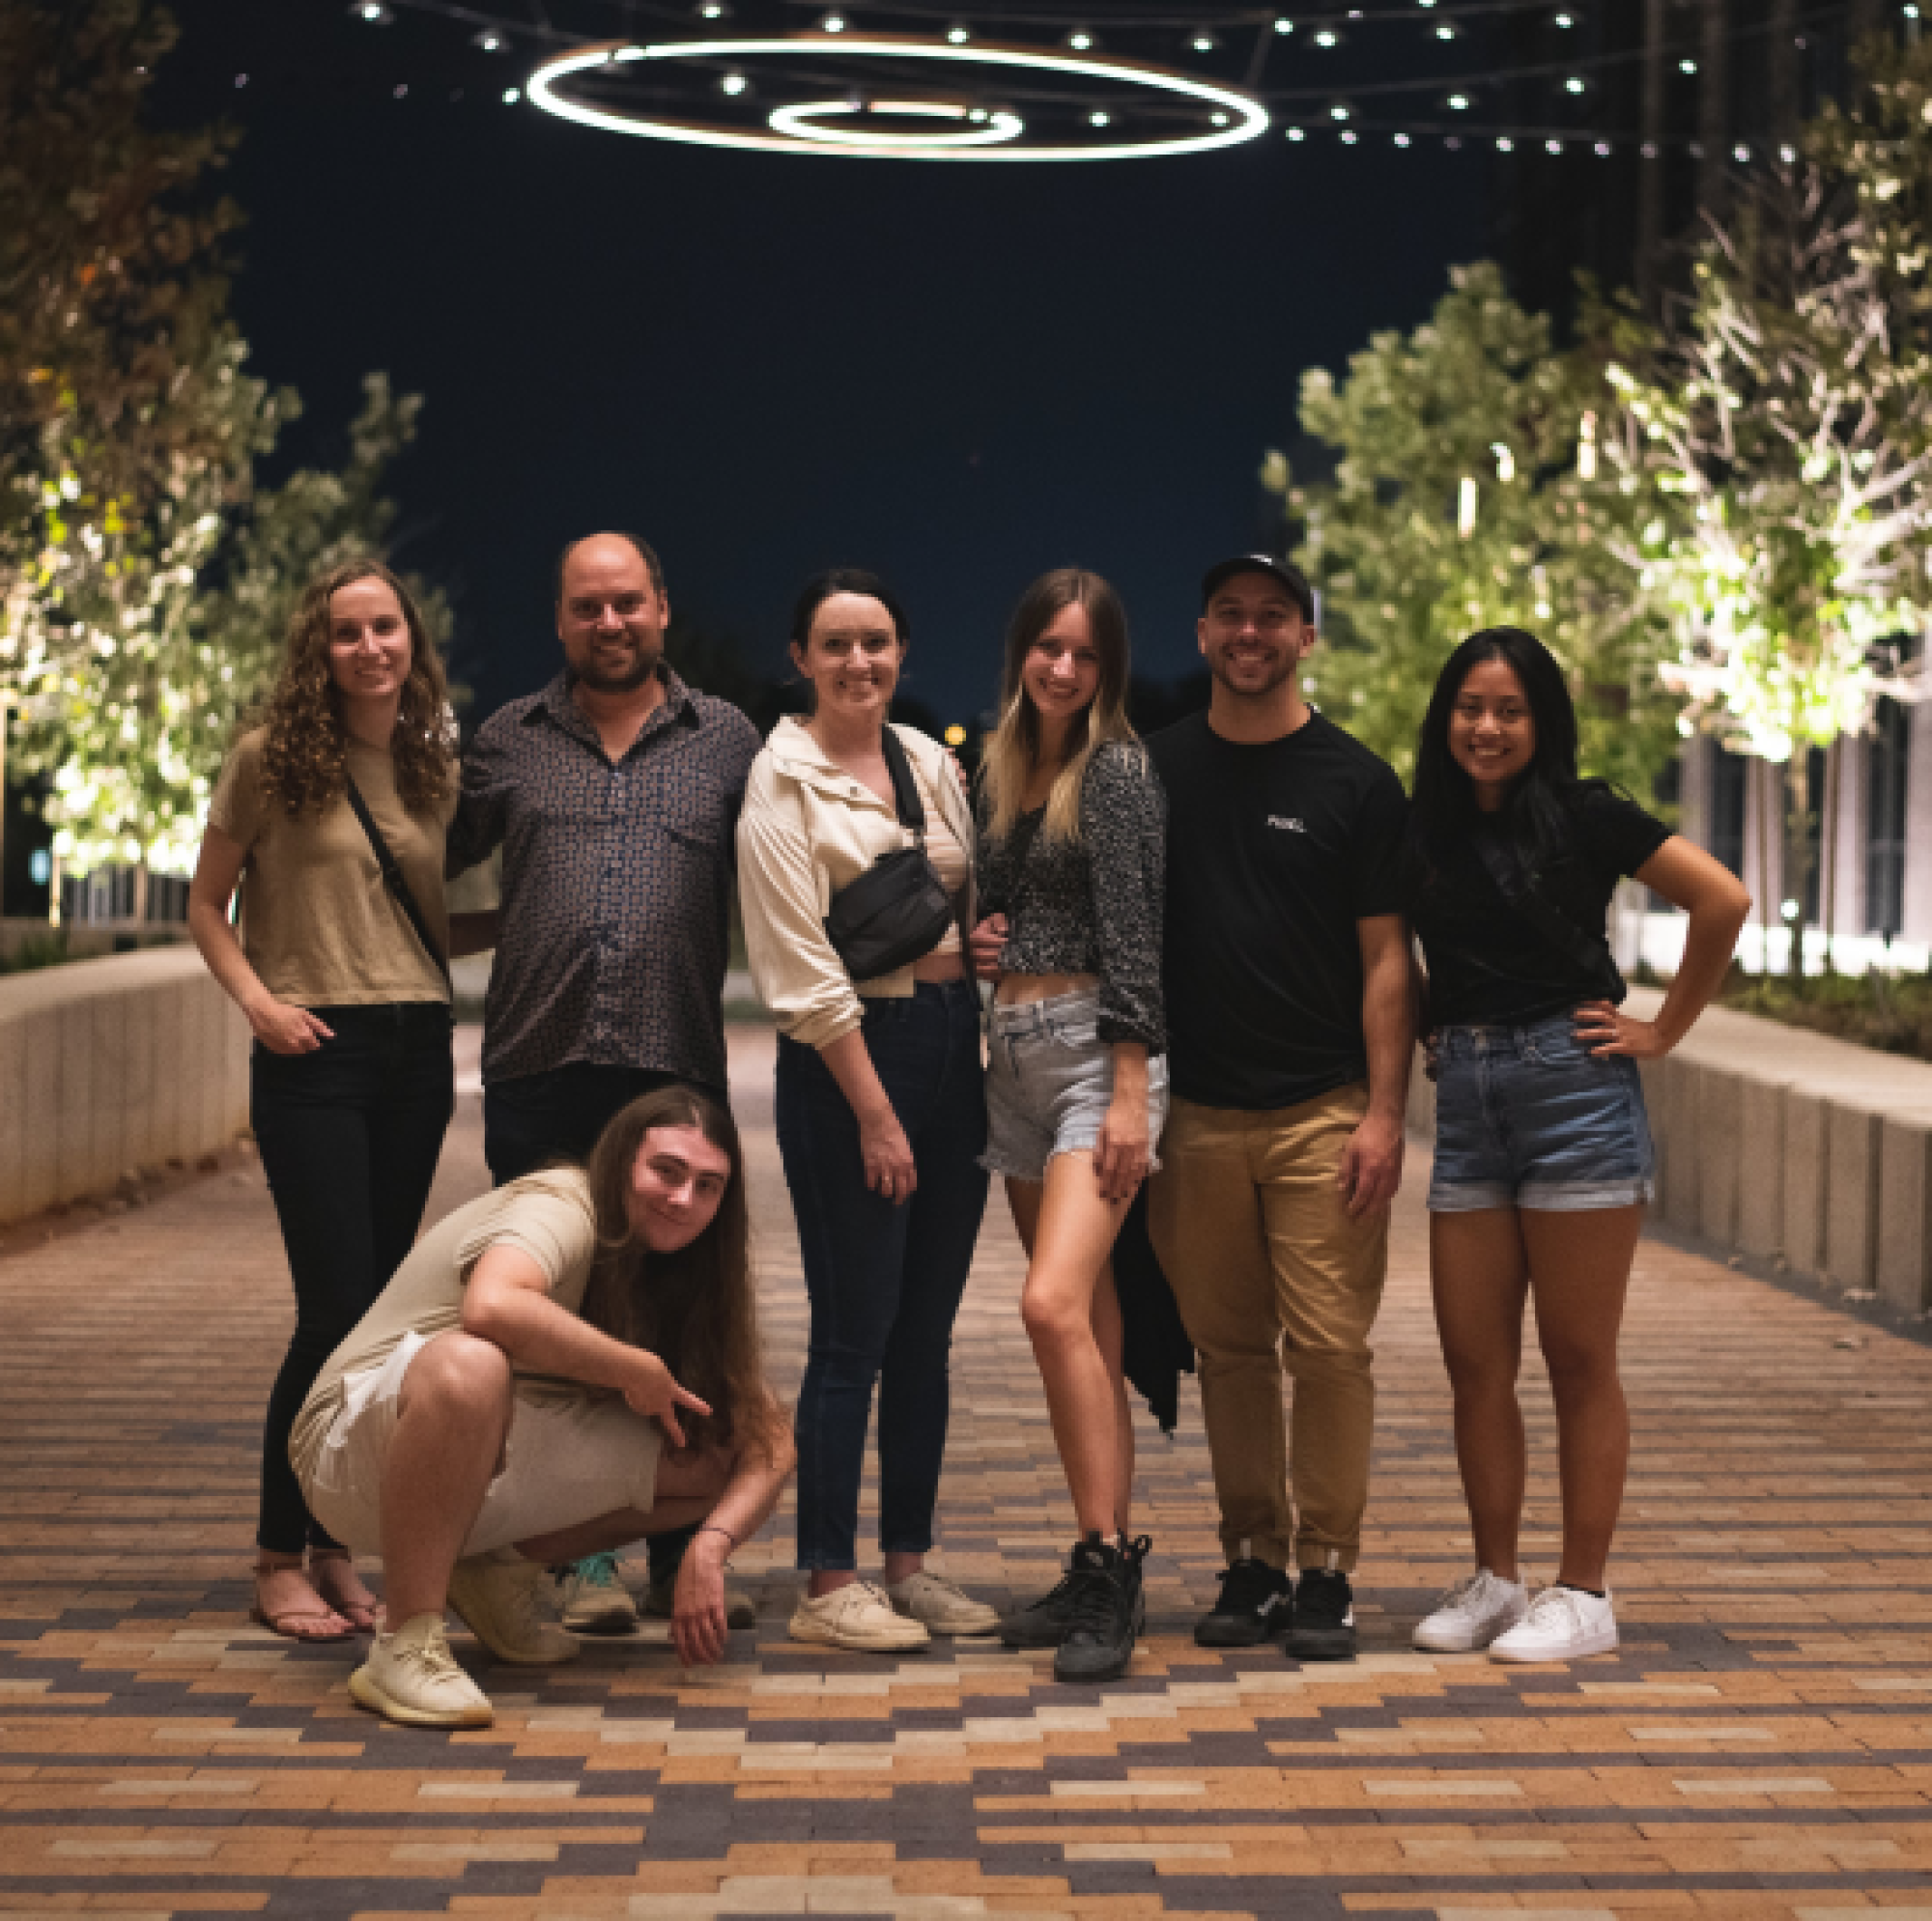 A group of By the Pixel team members posing for a photo at night on a well-lit, decorative brick walkway